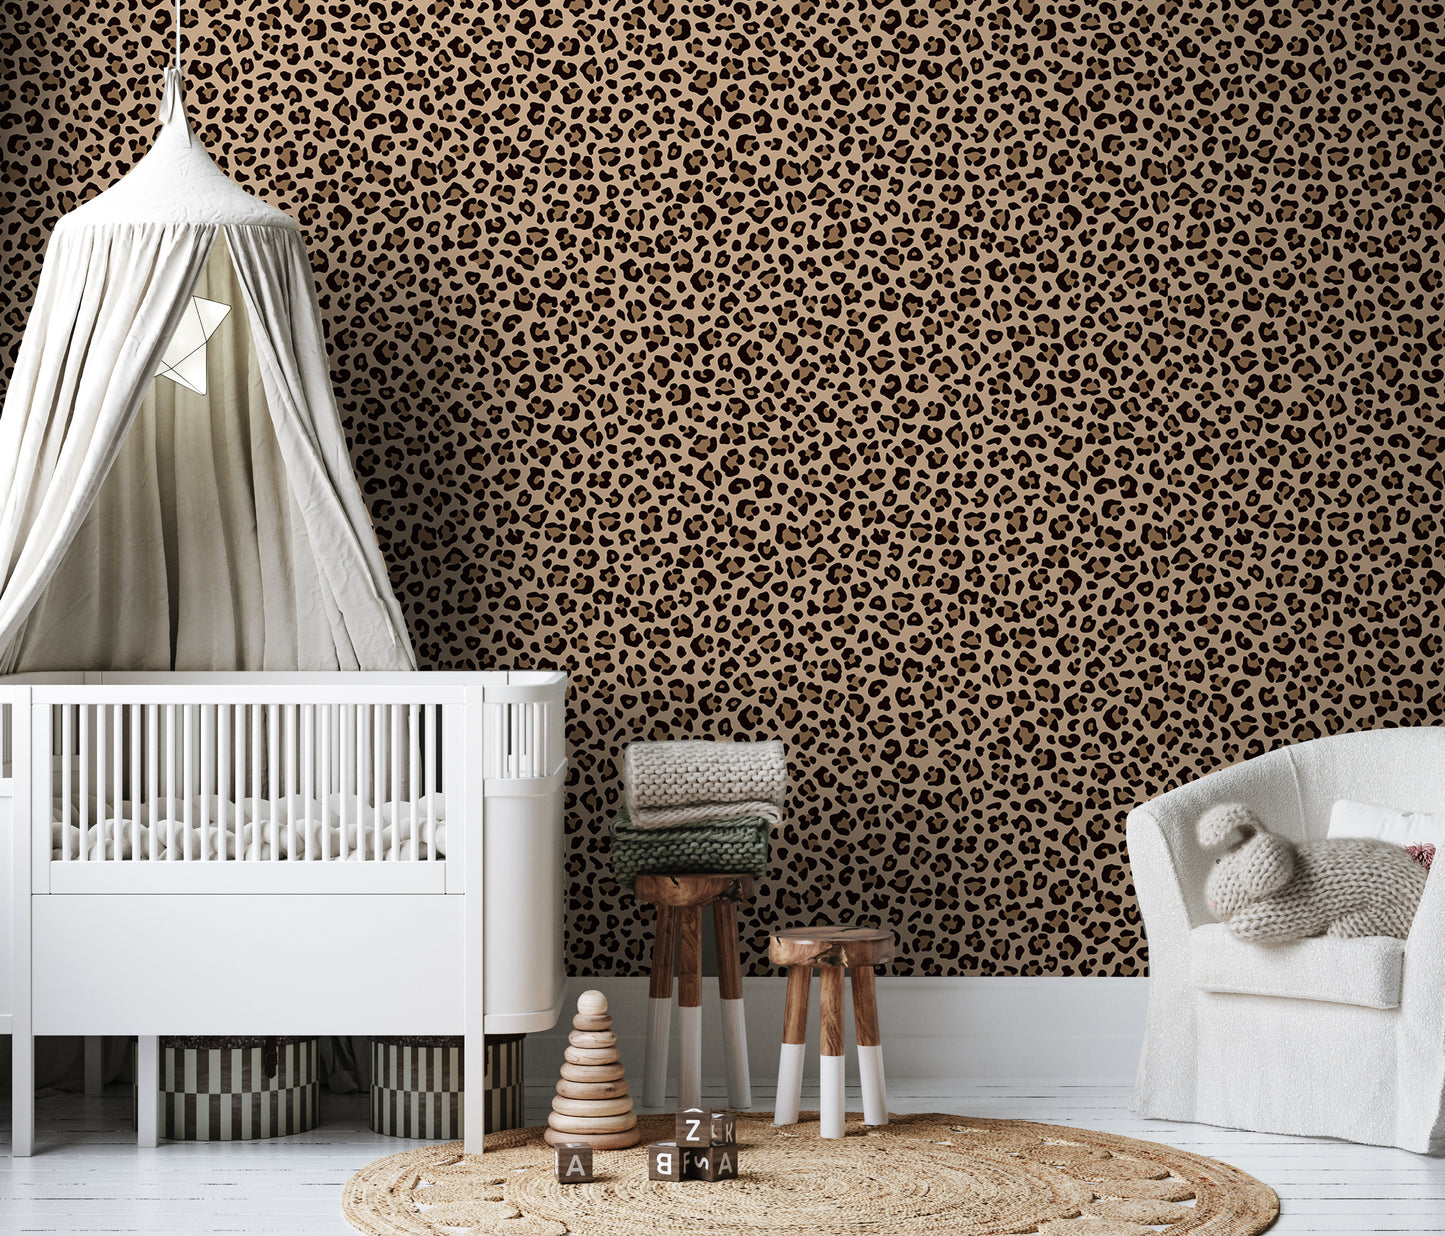 Lazy Leopard Removable Peel And Stick Wallpaper